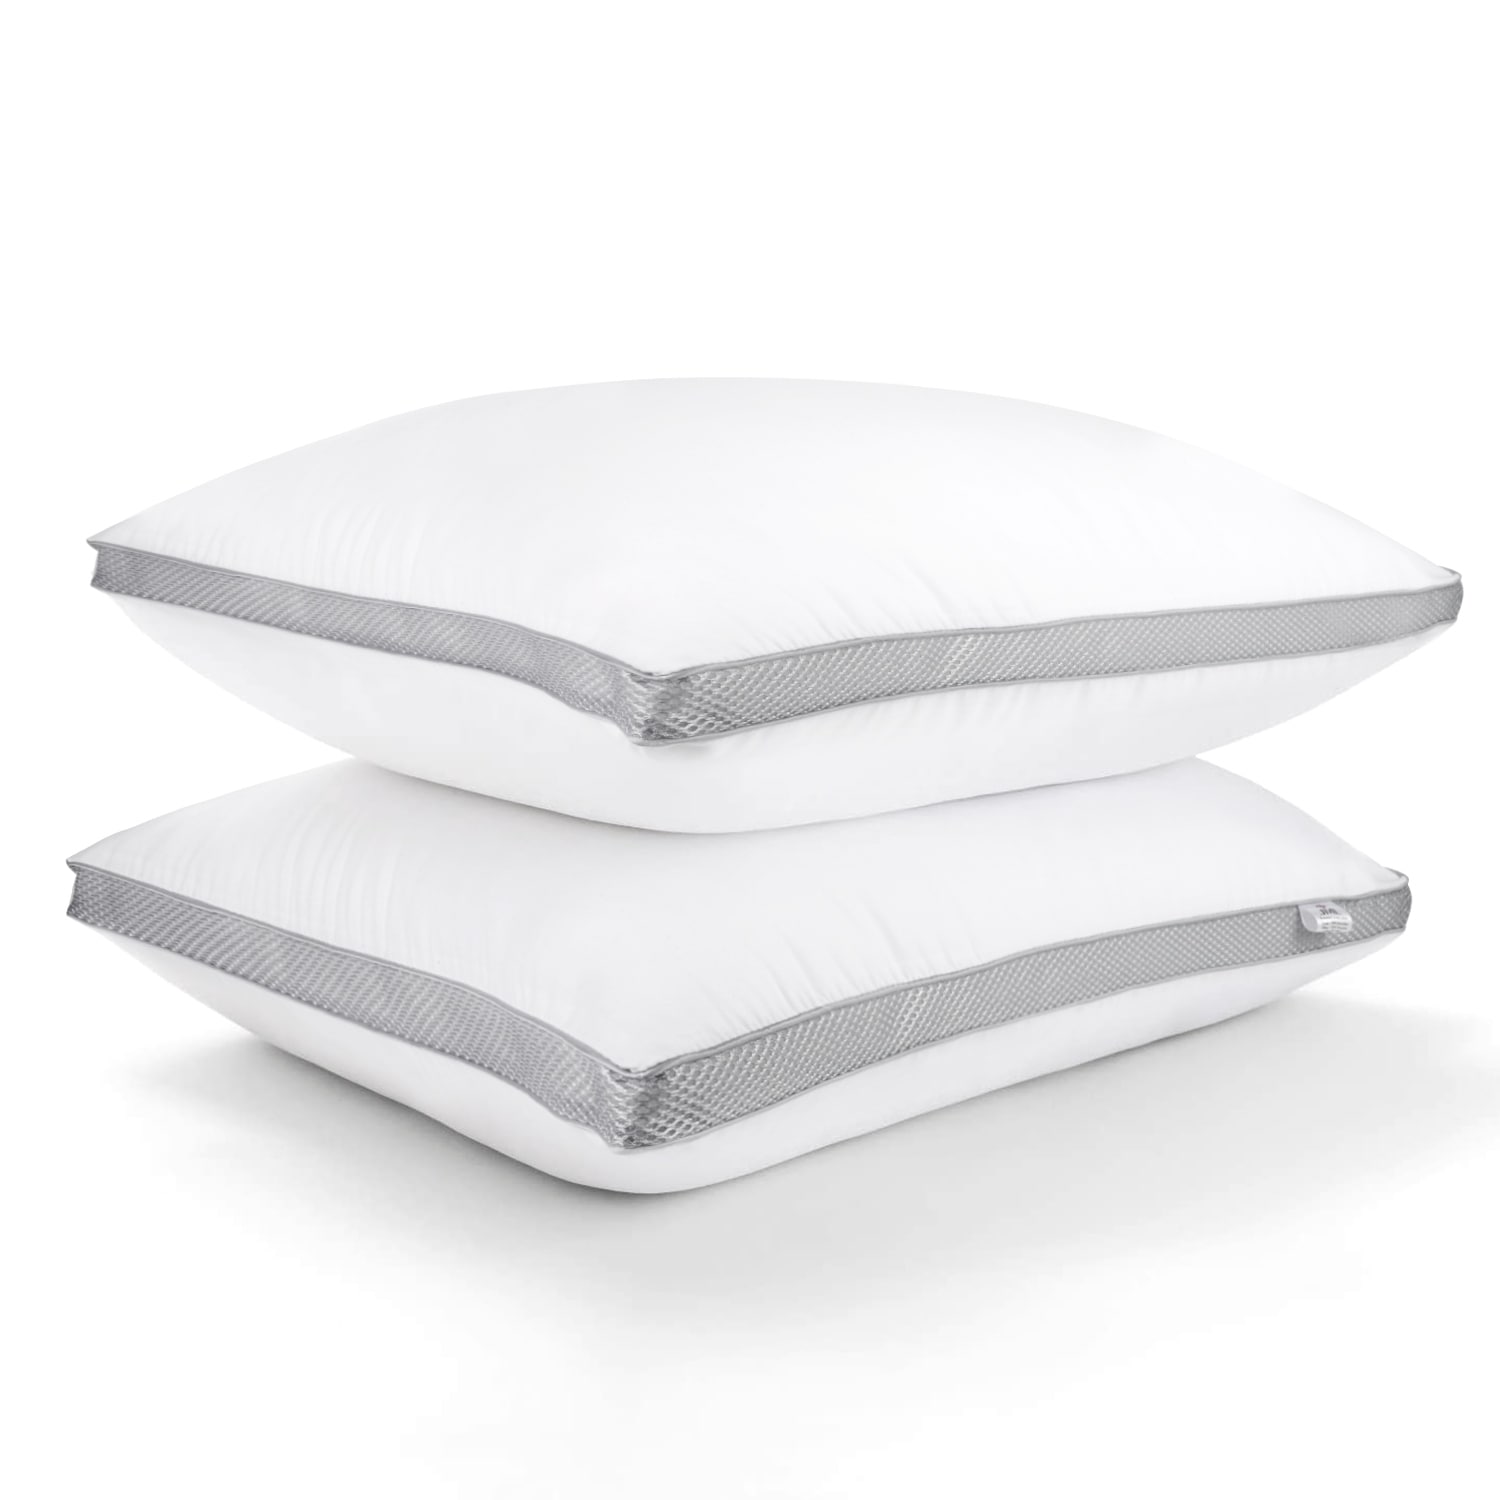 https://ak1.ostkcdn.com/images/products/is/images/direct/4681ad865b3ea72f80542fdf2750f3662347ab1c/2-Pack-Cotton-Pillows-Gusseted-Pillows-for-Side%2C-Stomach-and-Back-Sleeper.jpg